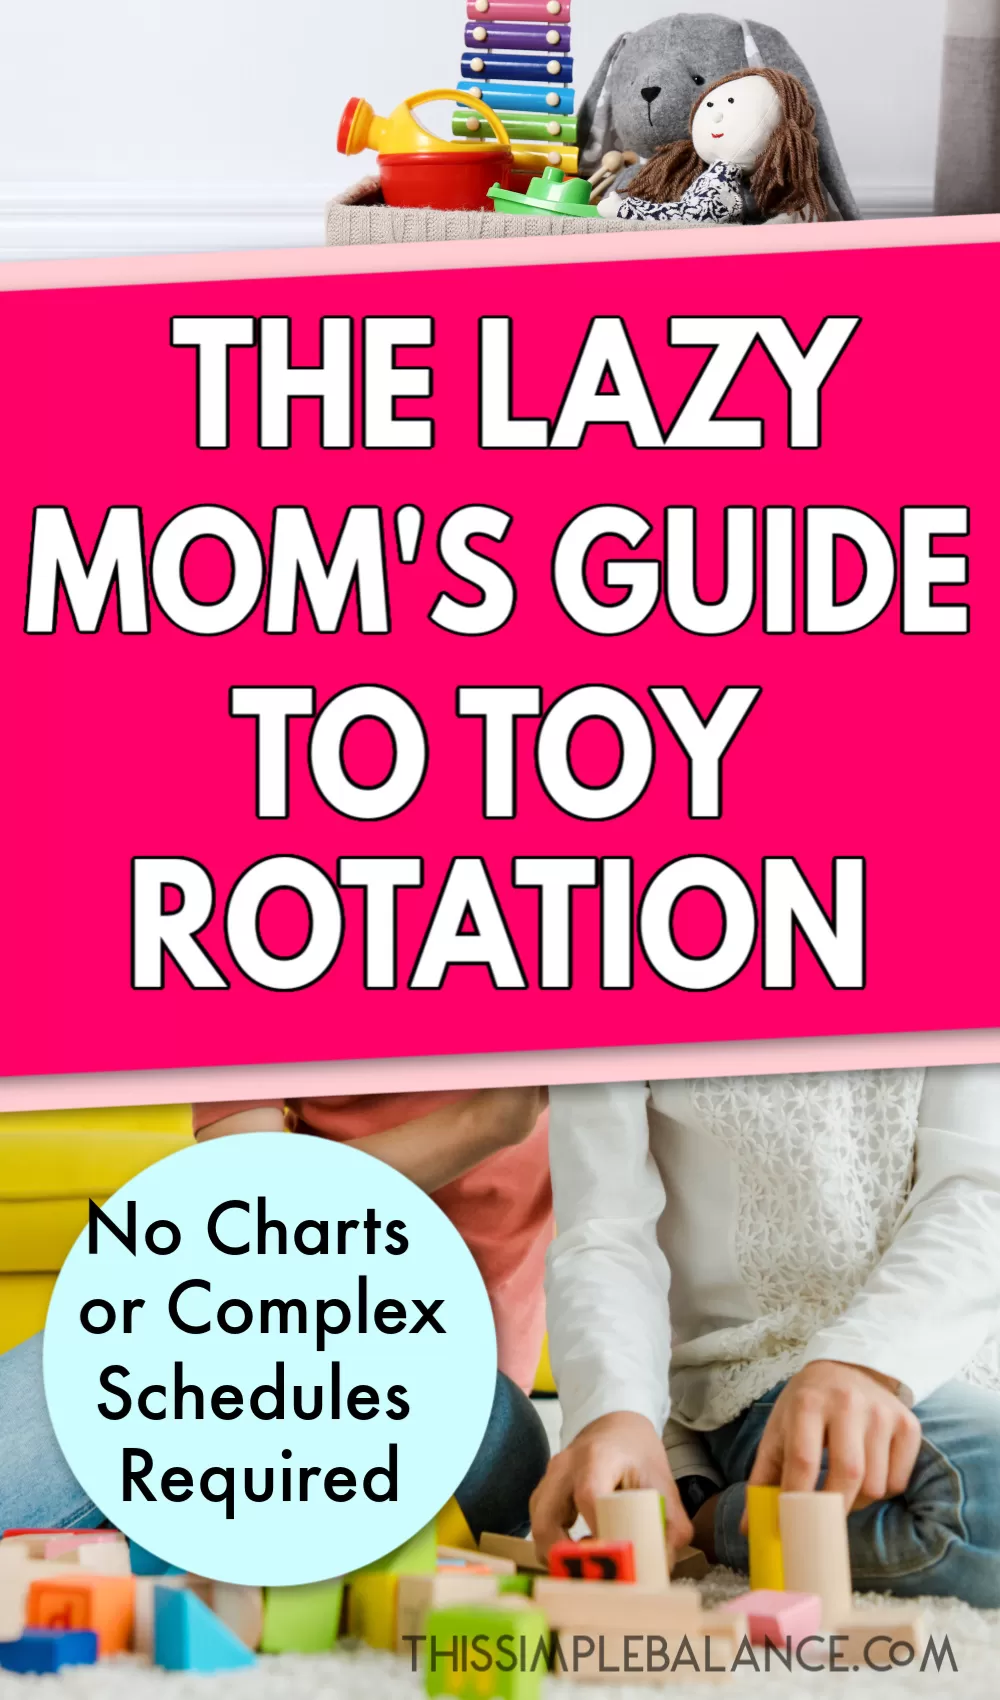 box of new toys for rotation in woven basket, kids playing with wooden blocks, with text overlay, "the lazy mom's guide to toy rotation - no charts or complex schedules required"